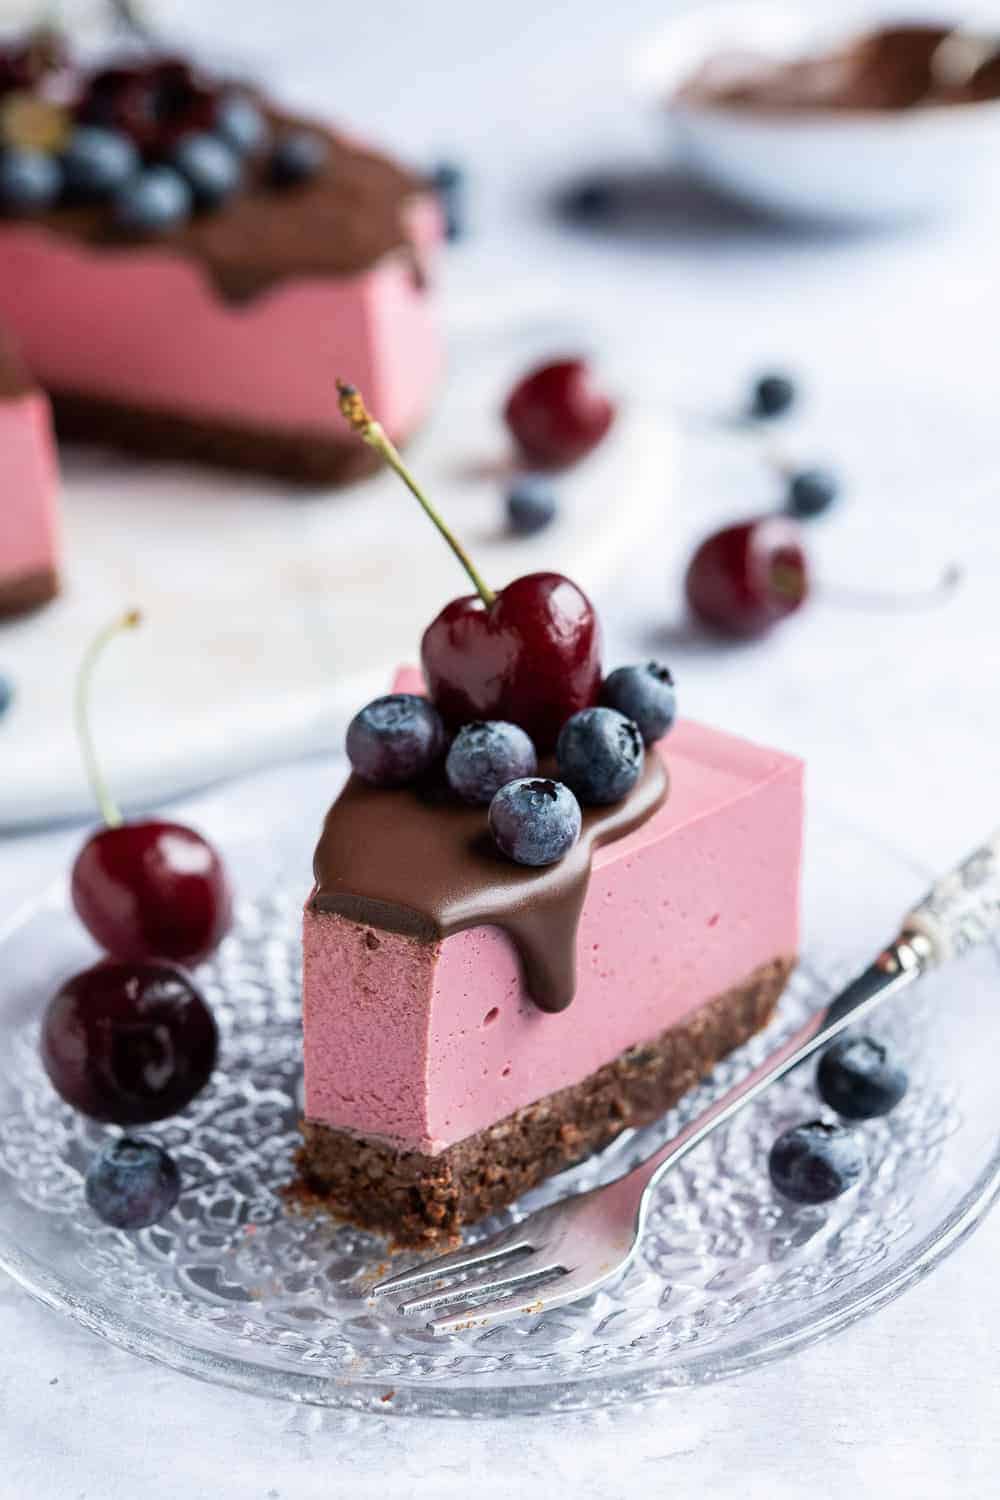 A slice of vegan chocolate cherry cheesecake topped with blueberries and a cherry on a glass plate with a forkful removed.